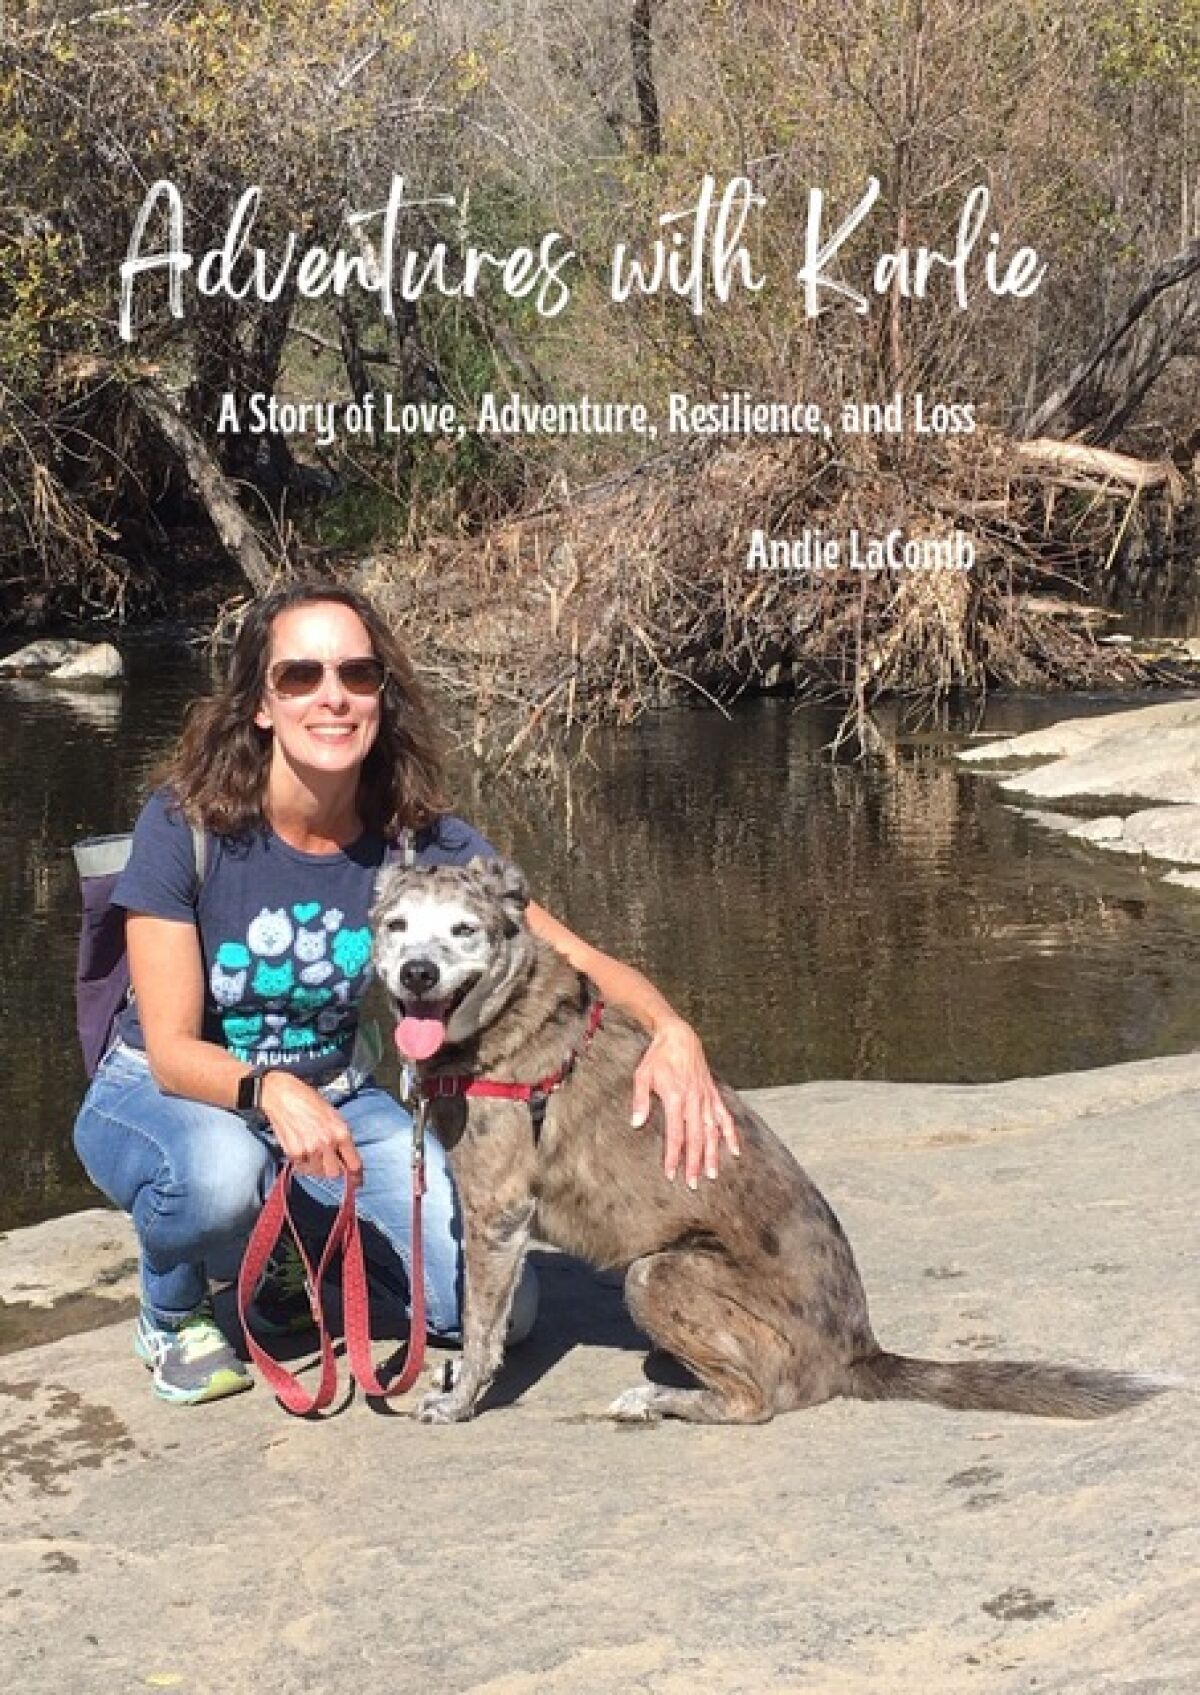 "Adventures with Karlie" by La Jolla resident Andie LaComb chronicles her local hikes with her senior dog.